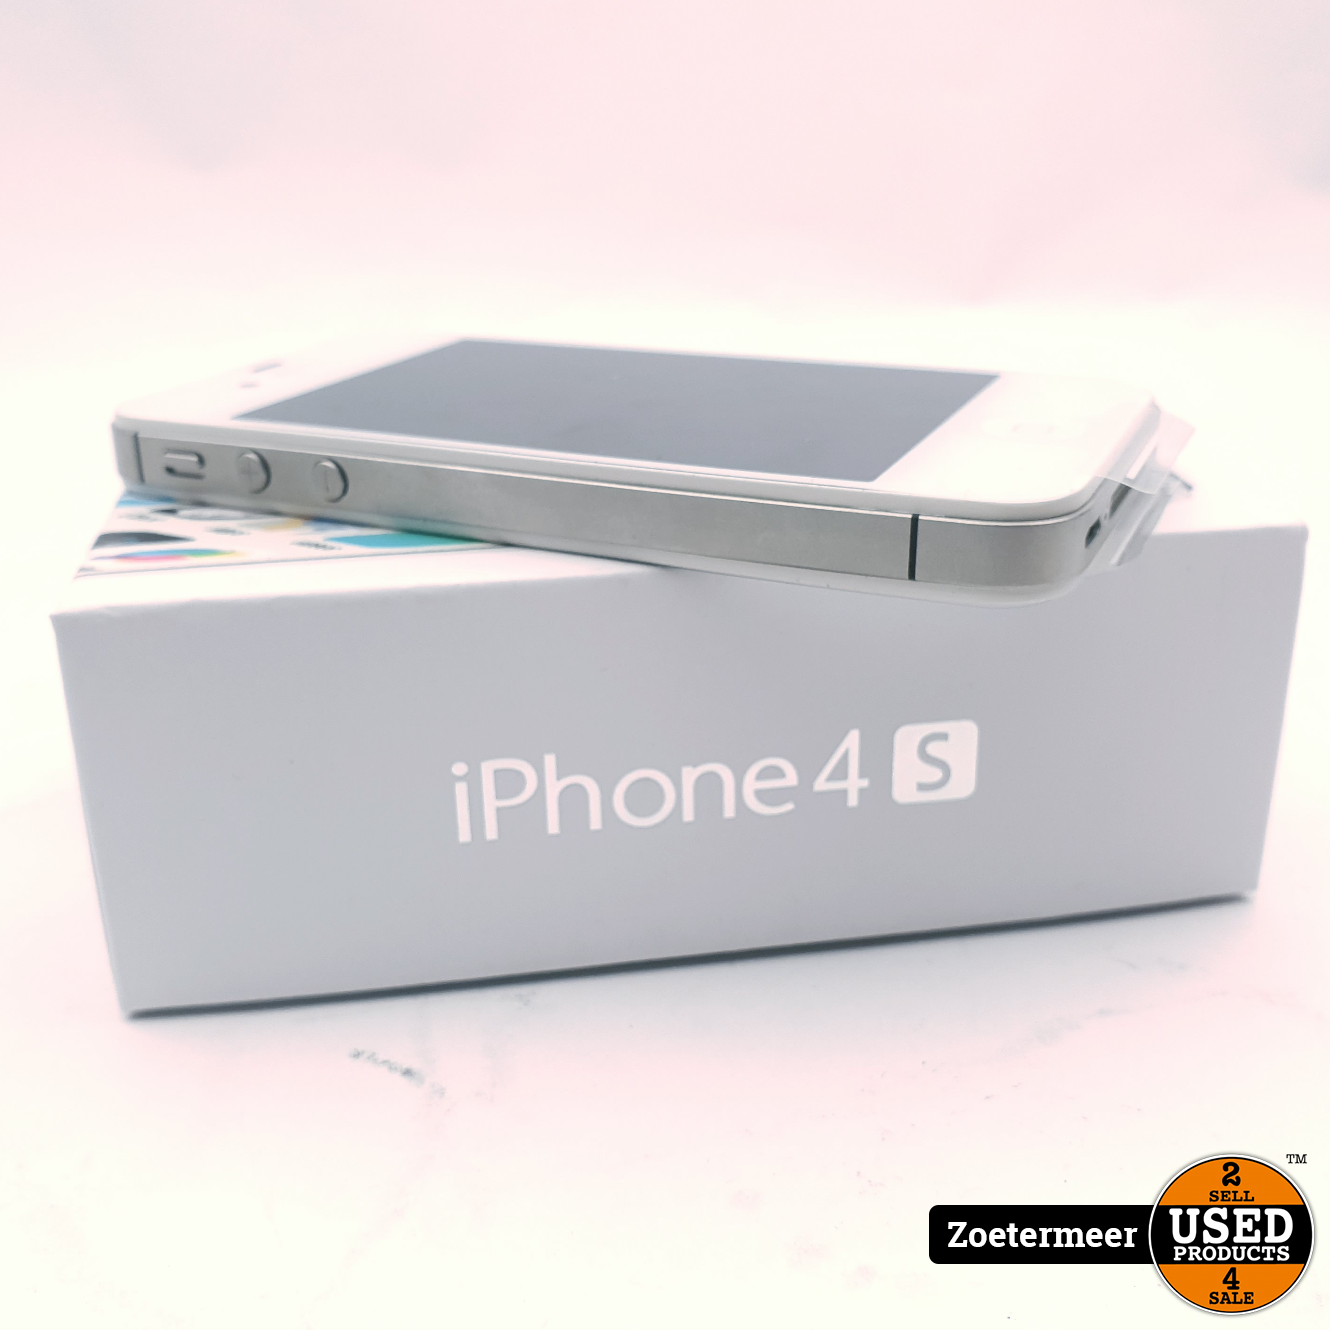 iPhone 4s 64GB || Nieuw - Used Products